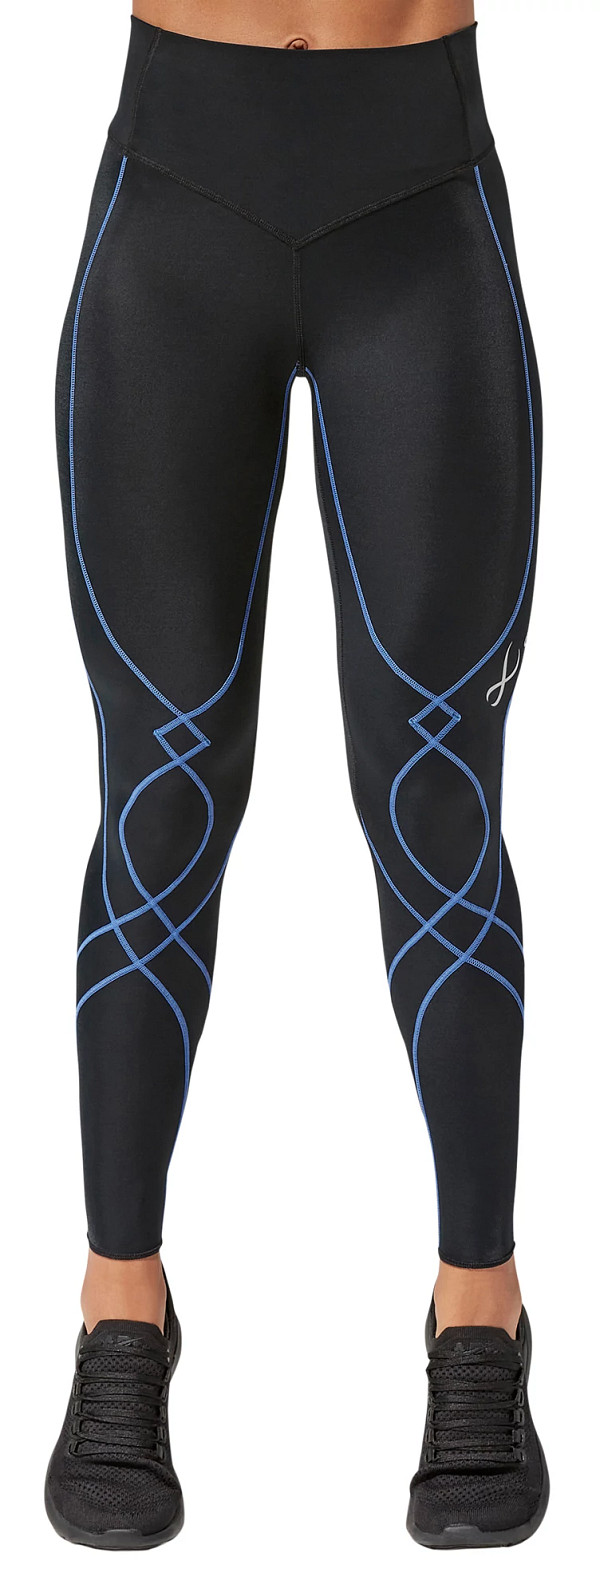 Womens CW-X Stabilyx 2.0 Joint Support Compression Tights & Leggings